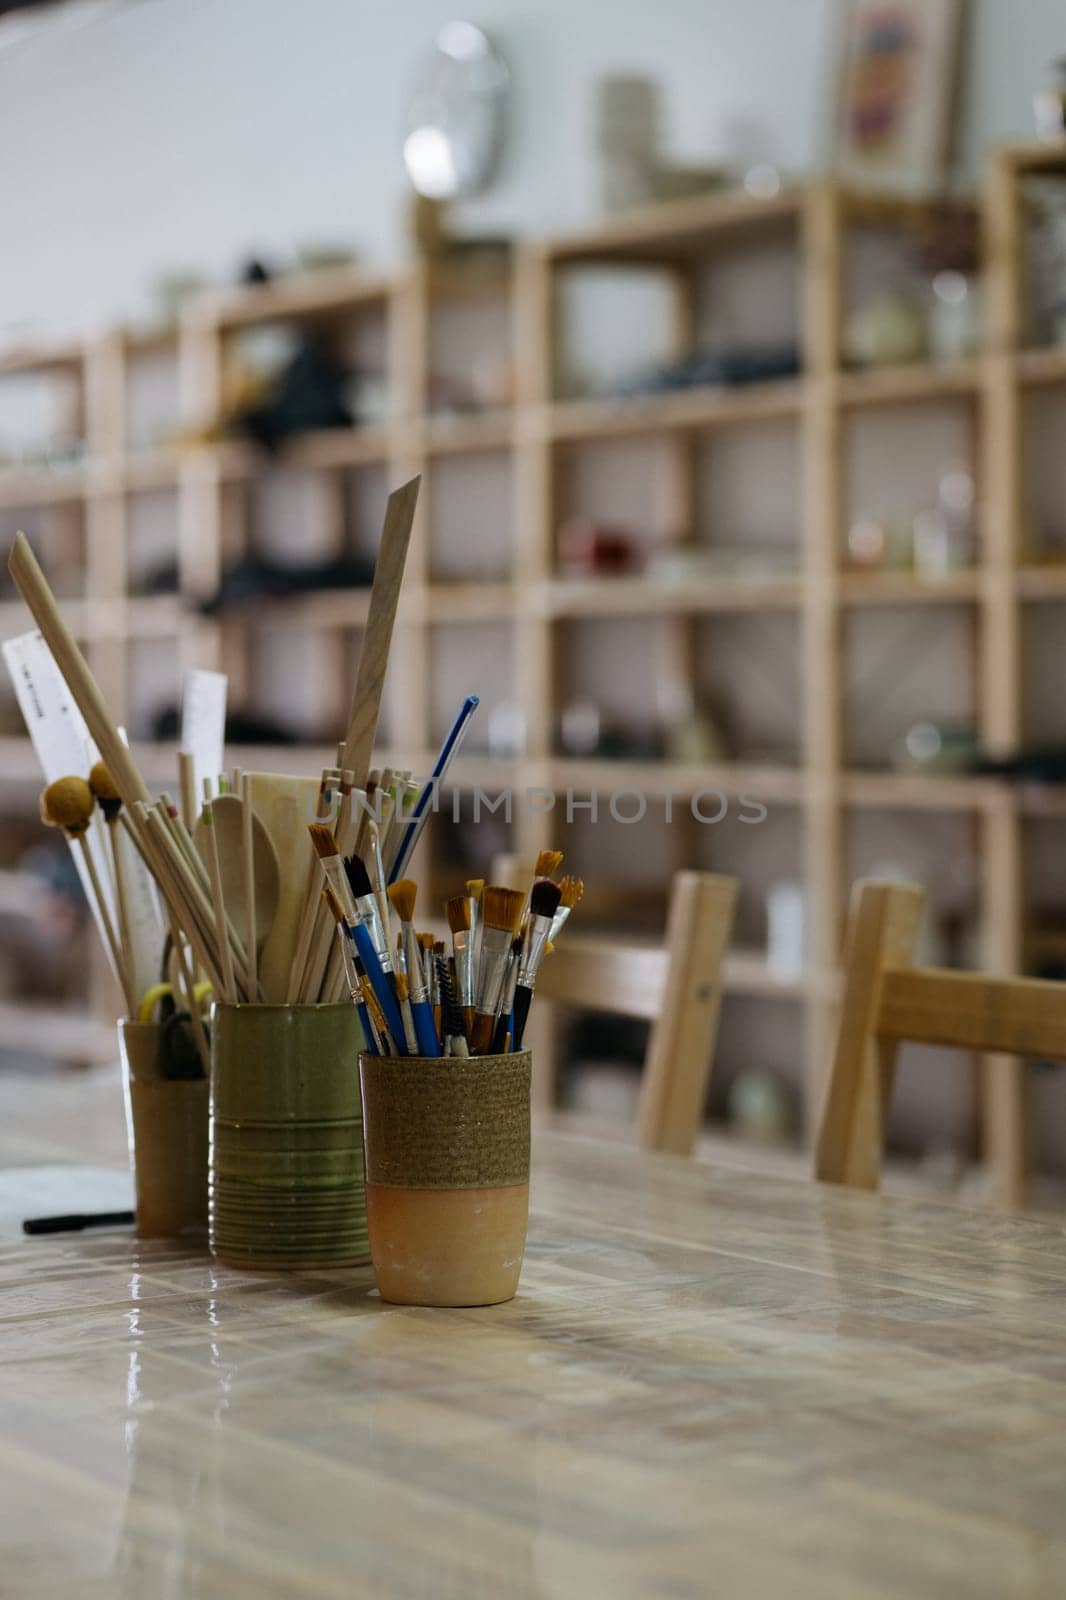 Artistic Pottery Studio Interior with Ceramic Tools and Brushes on a Work Table by apavlin